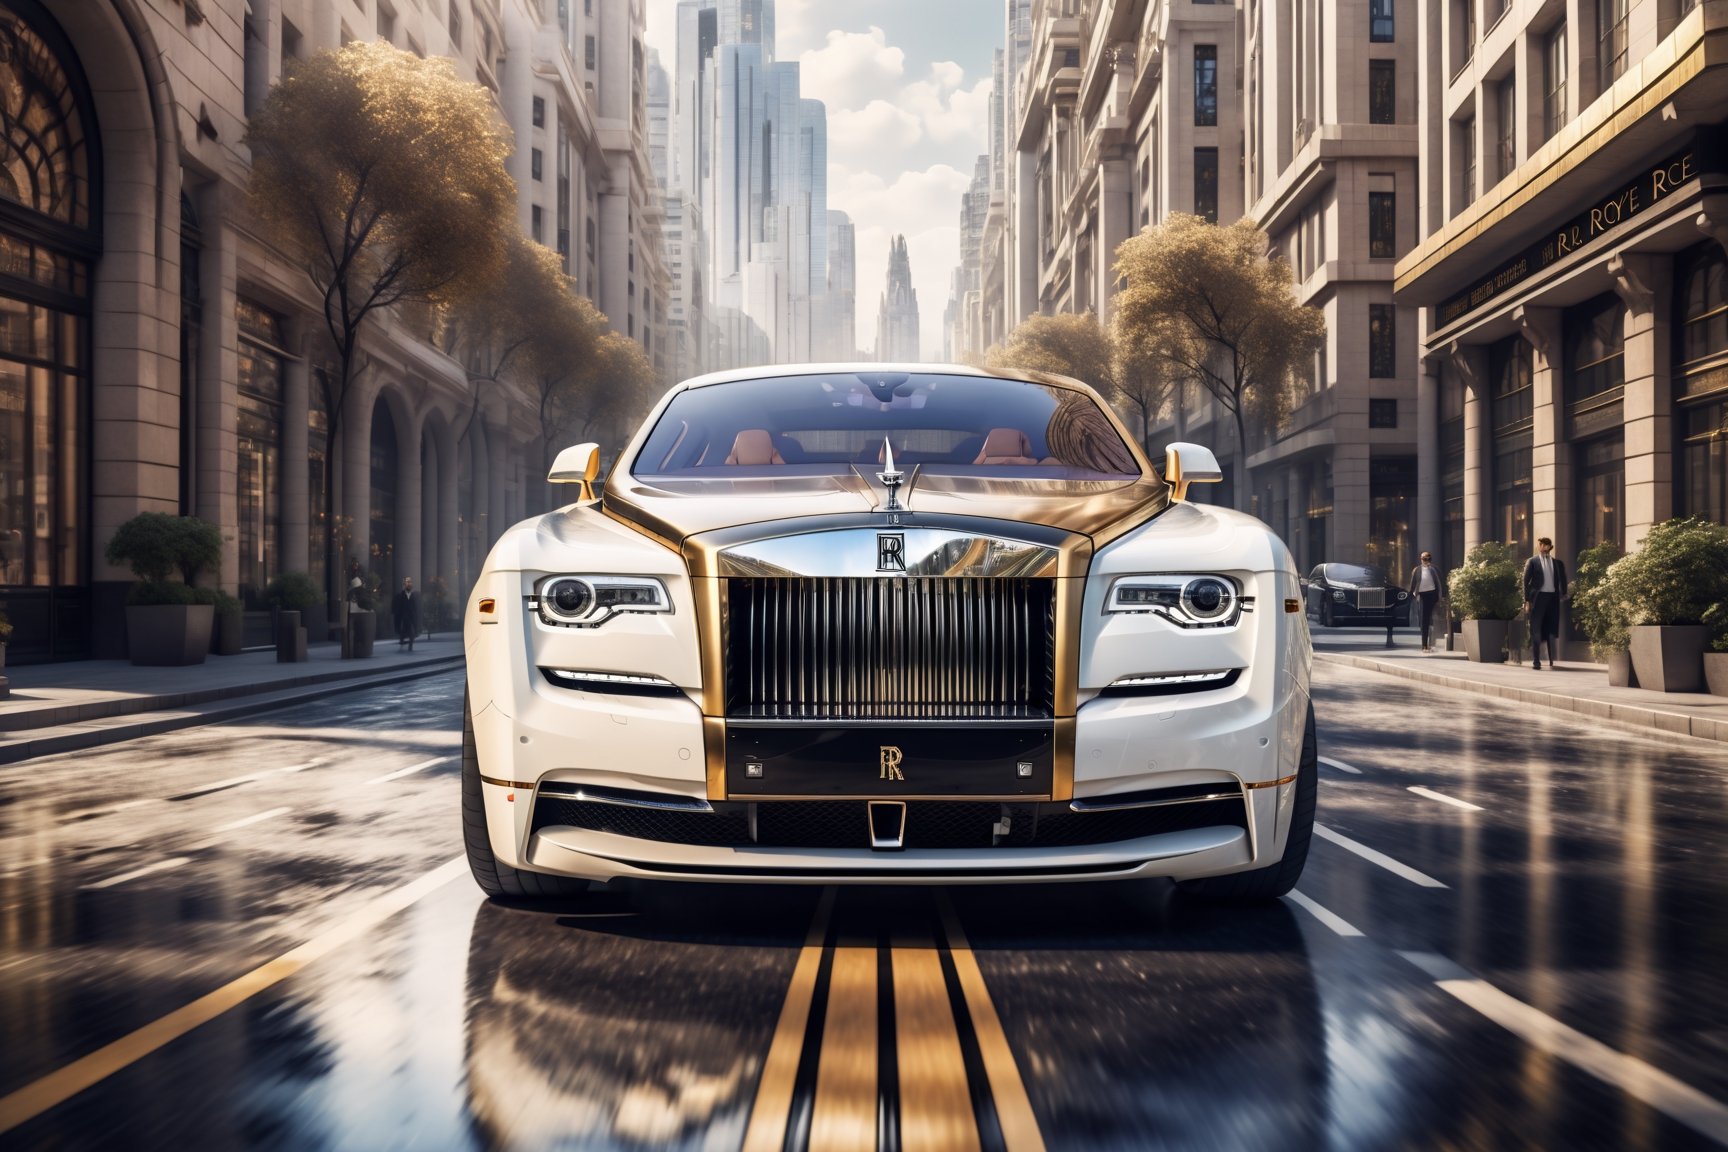 A futuristic hi-tech Rolls Royce Super Car inspired by, Art Deco, Retro-inspired Super Car, White and Gold, ((Black wheels)),
on the road in city area background, at Midday time, front view, symmetrical, ,H effect